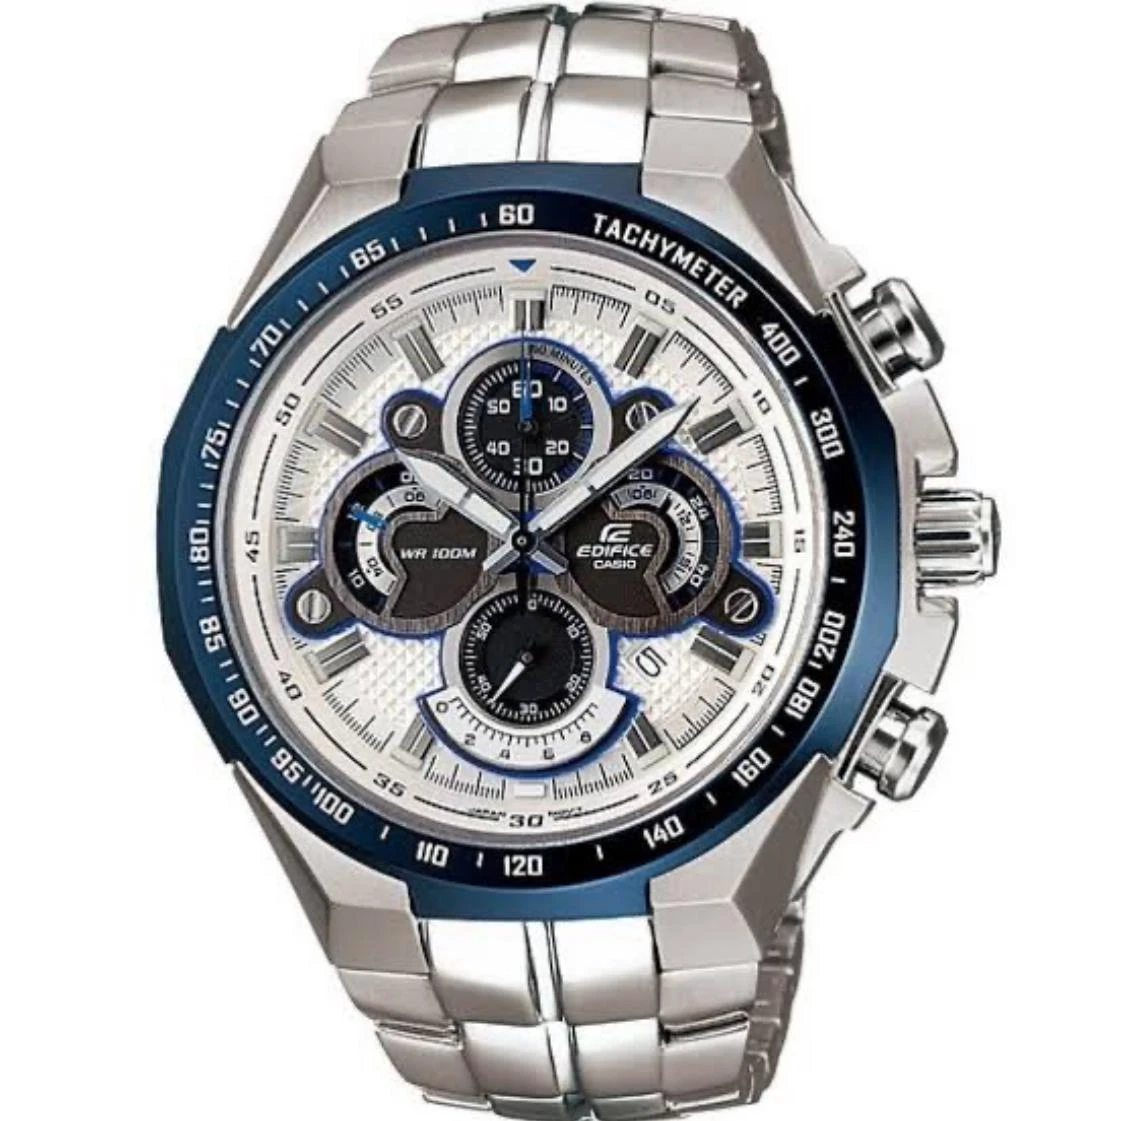 Casio Edifice Analog Watch for Men - Stainless Steel with a Silver Case and a White Dial